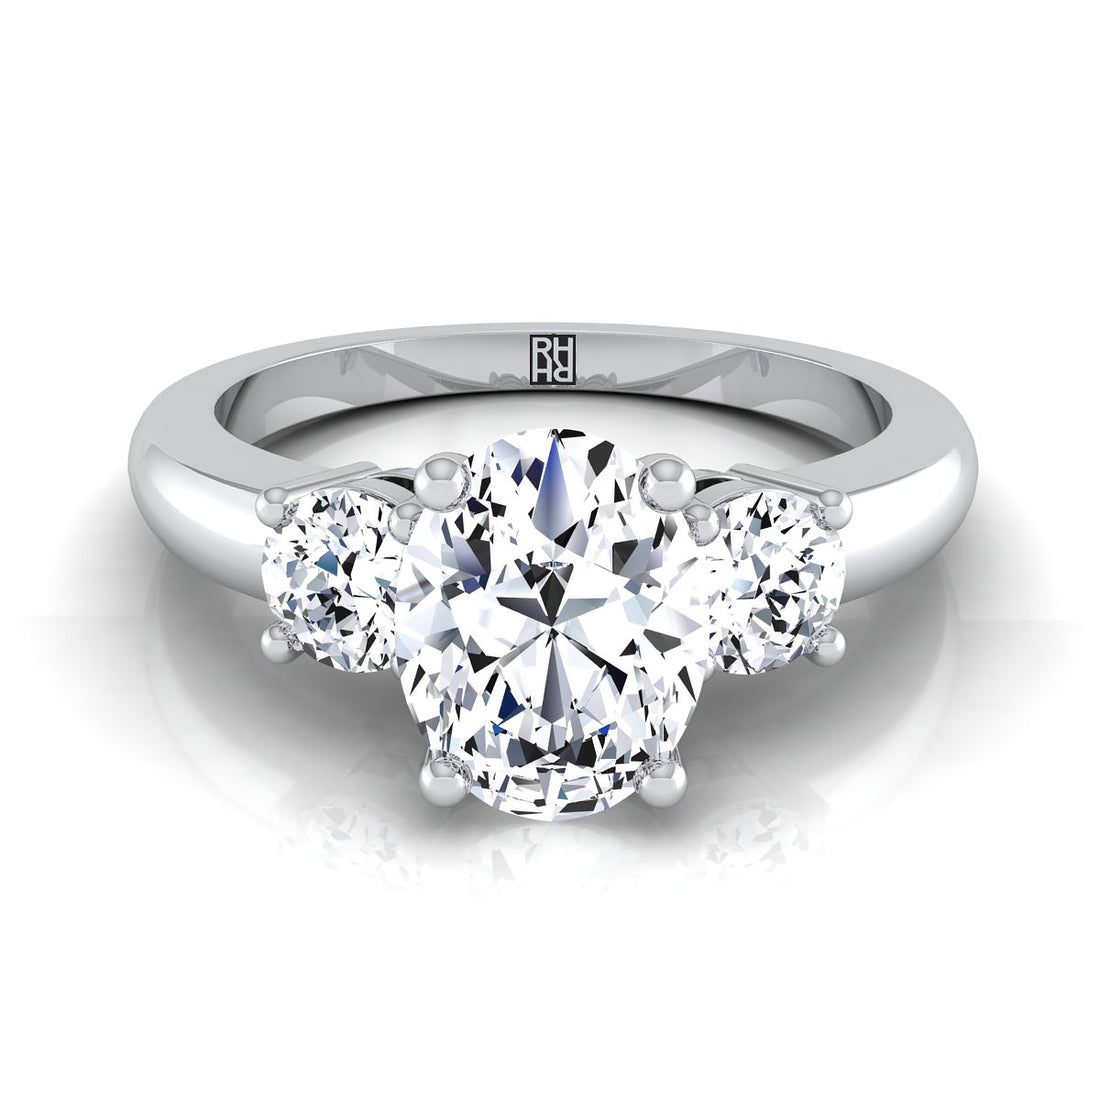 Tips to Buy Diamond Rings for Couples